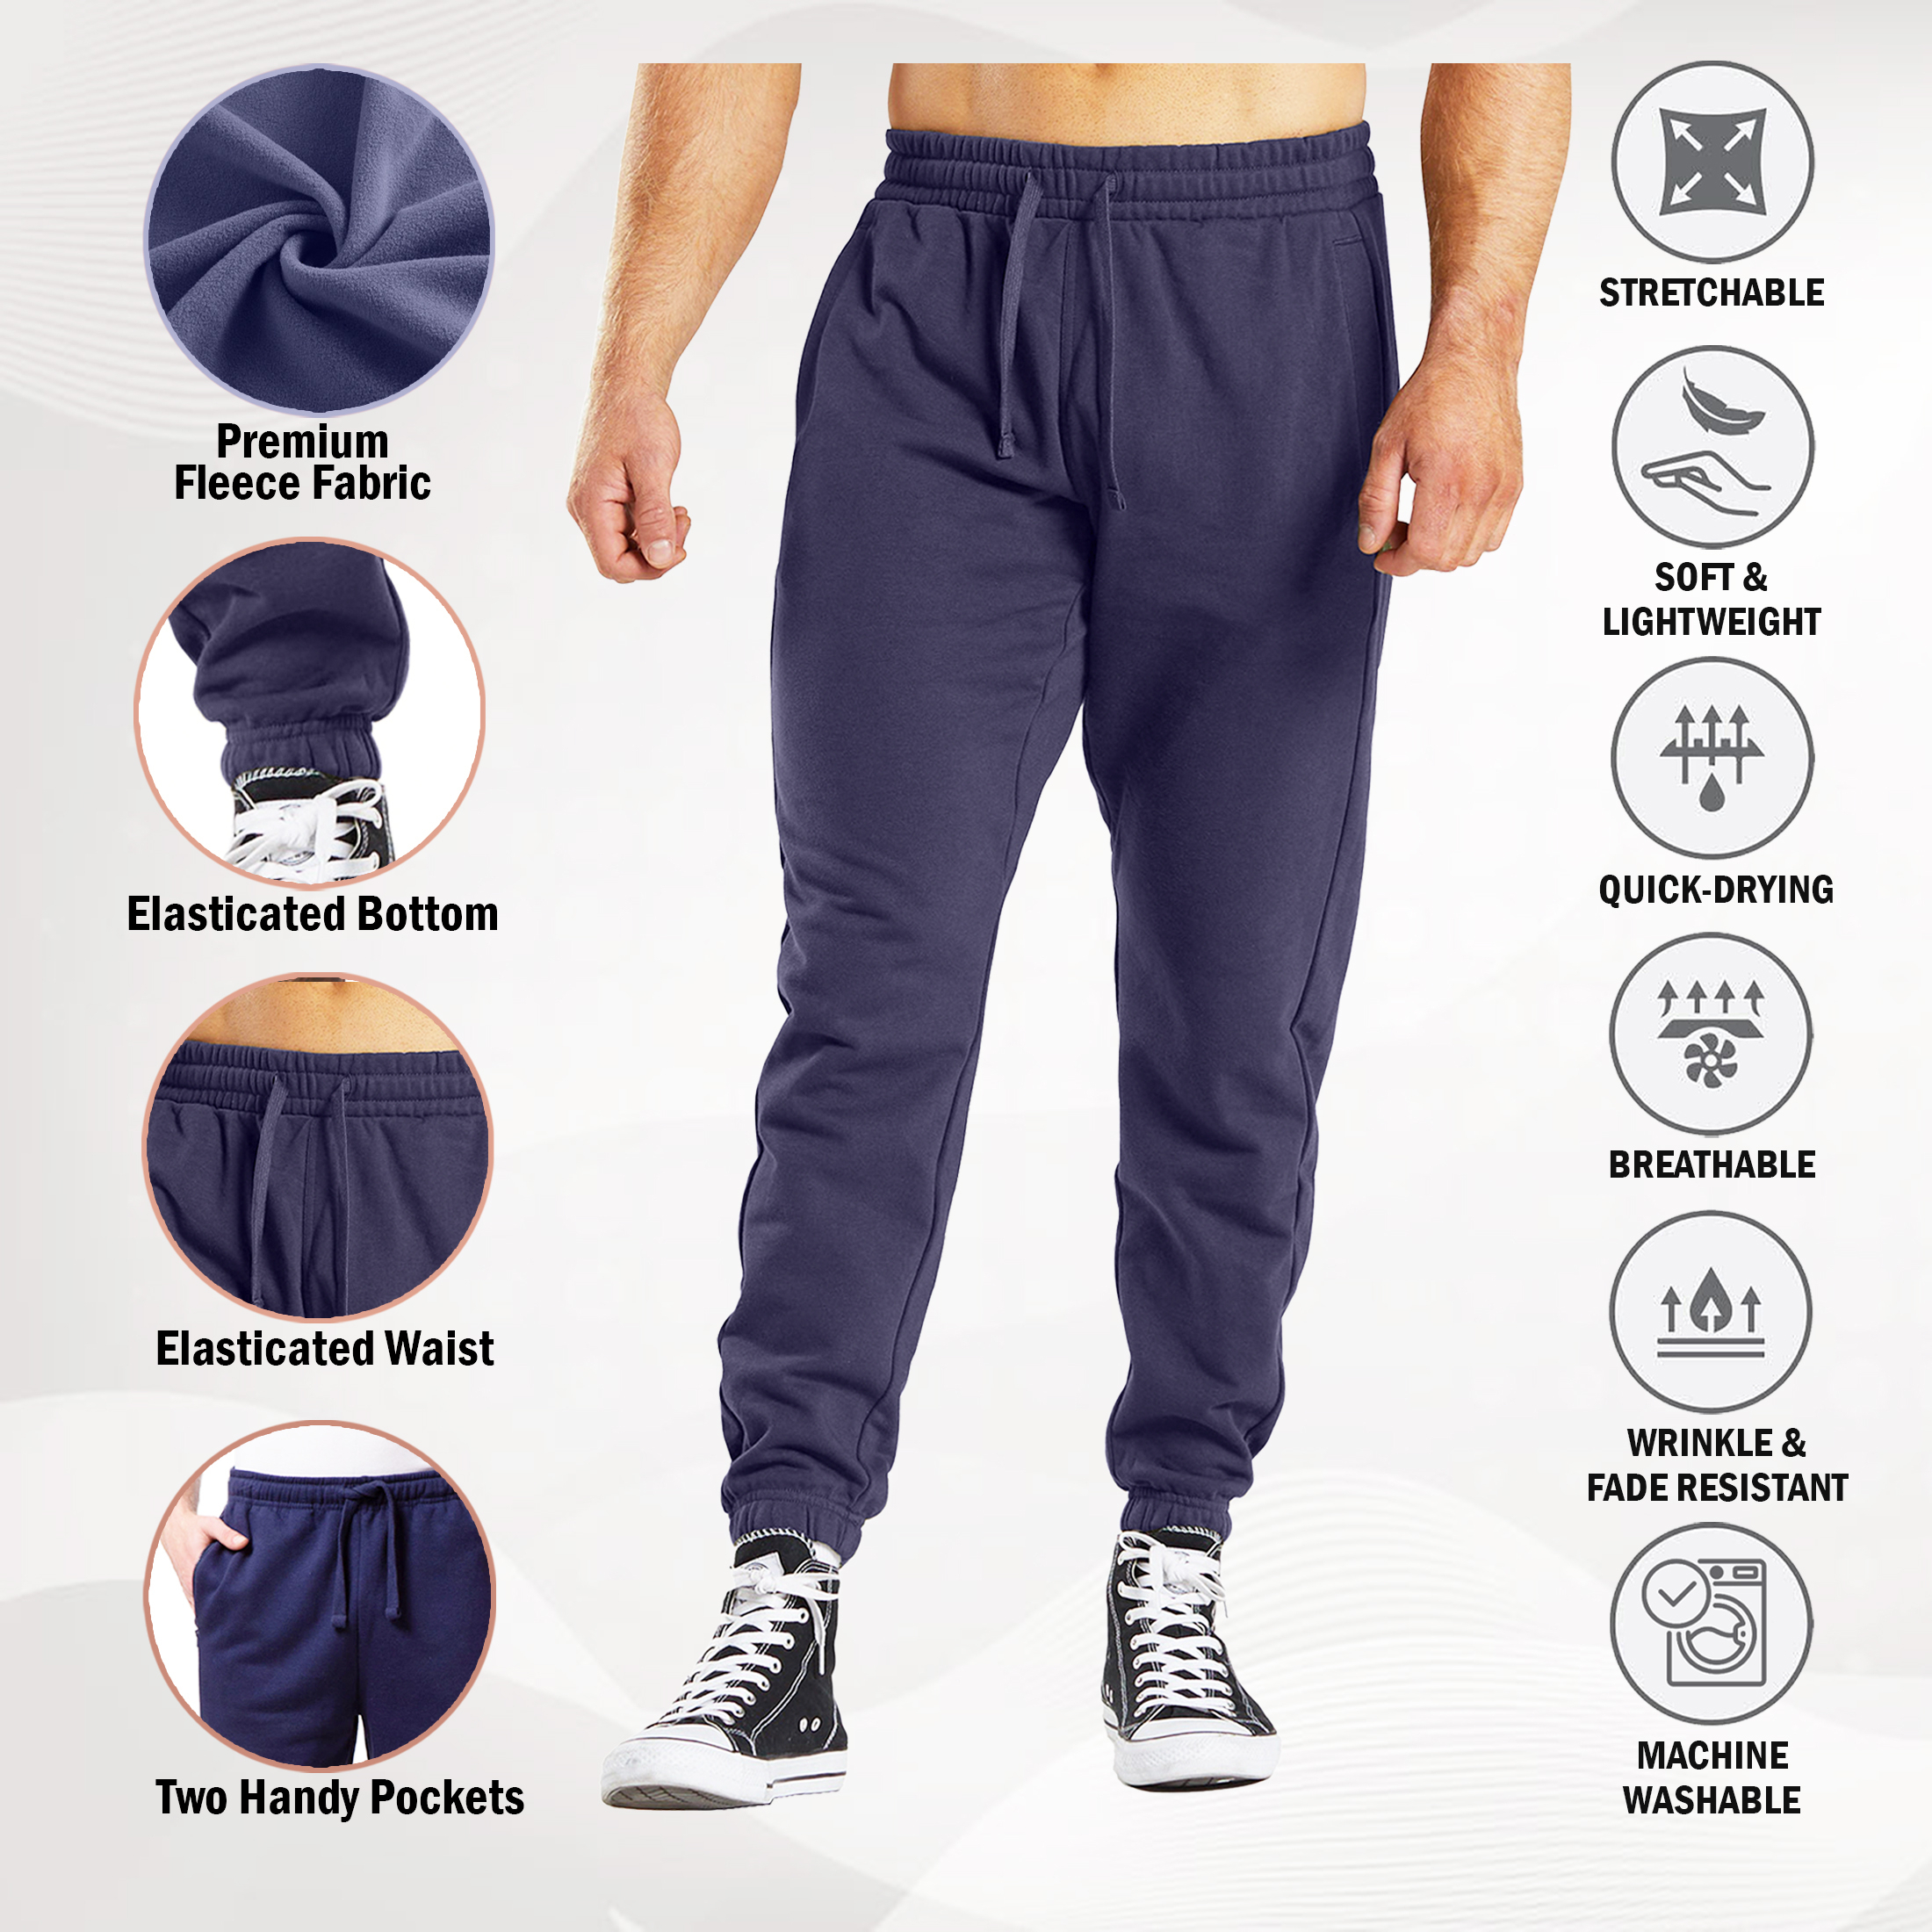 3-Pack: Men's Casual Fleece-Lined Elastic Bottom Sweatpants Jogger Pants With Pockets - Solid, Large